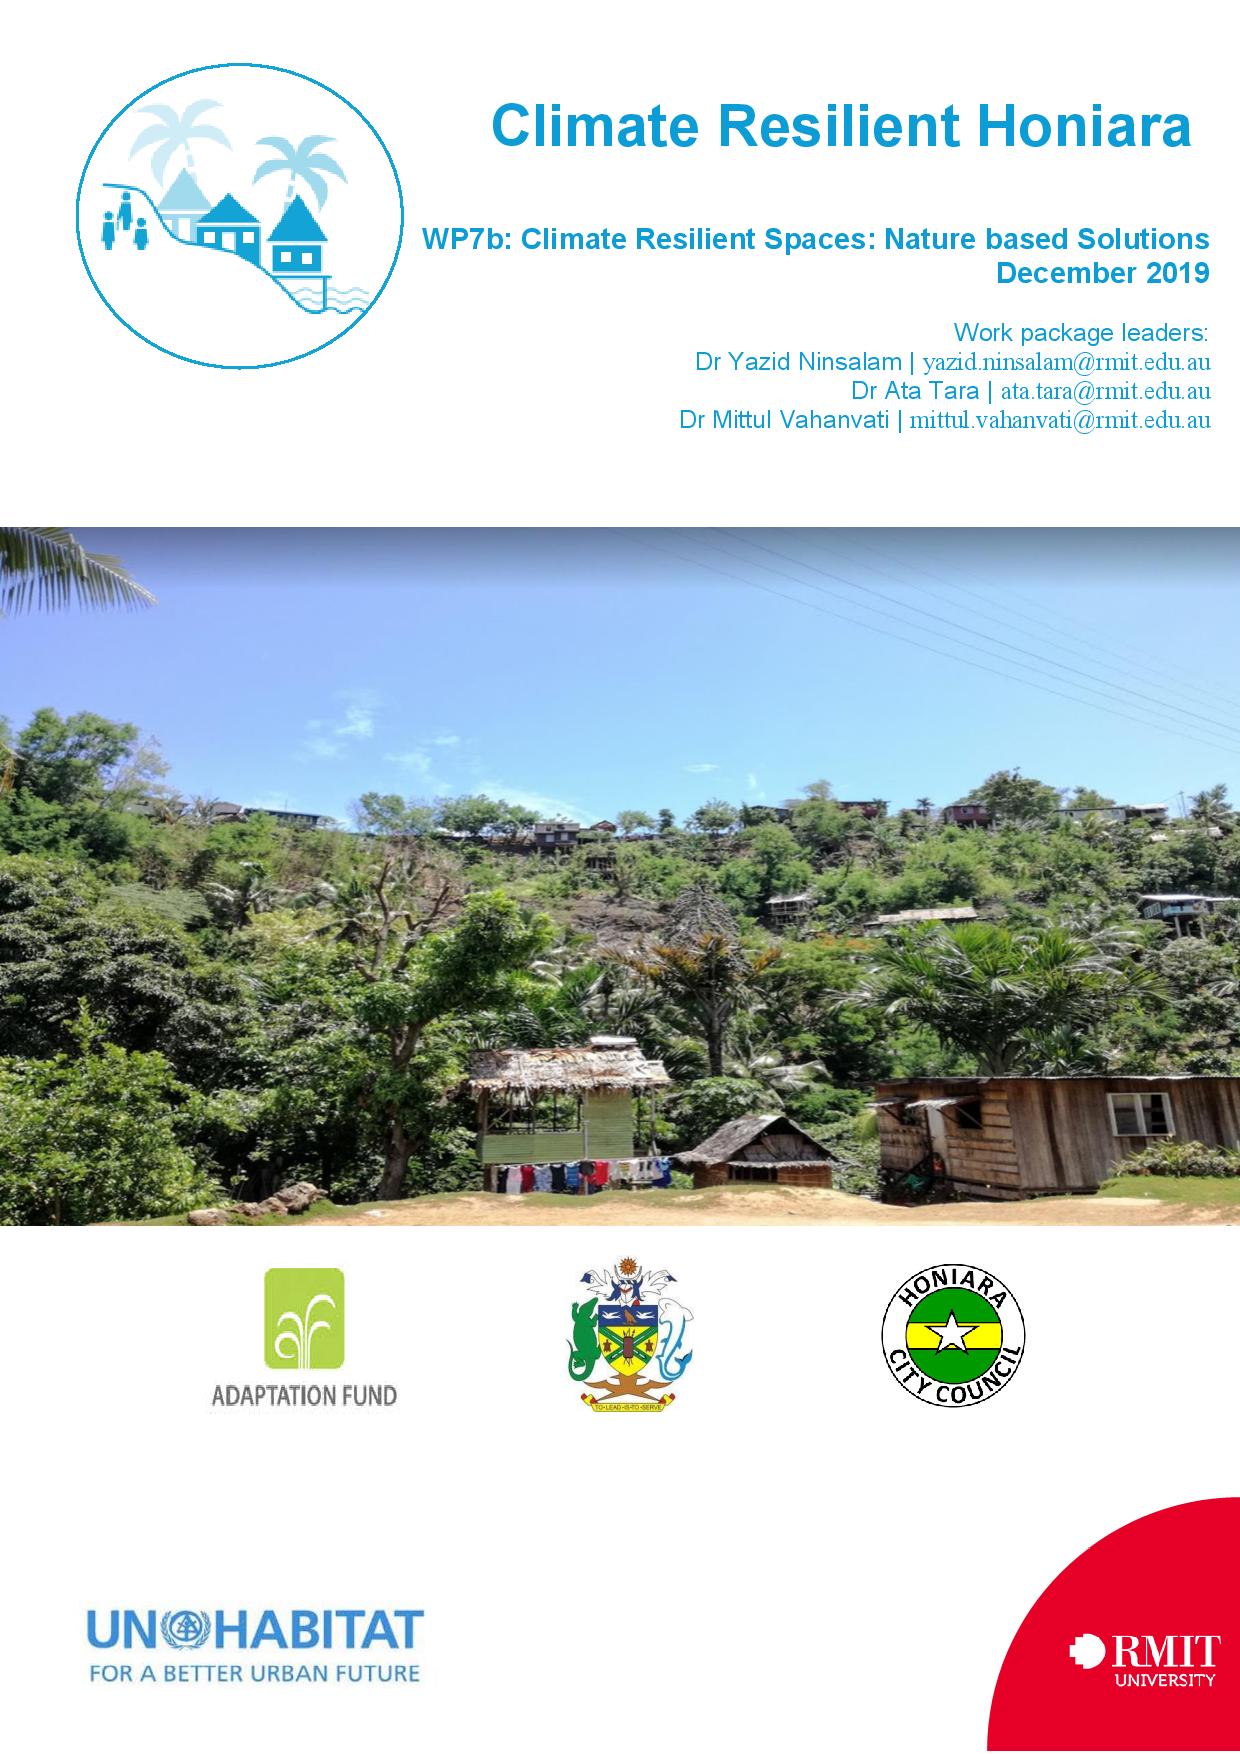 Solomon Islands: Climate Resilient Honiara: Climate Resilient Spaces: Nature based Solutions